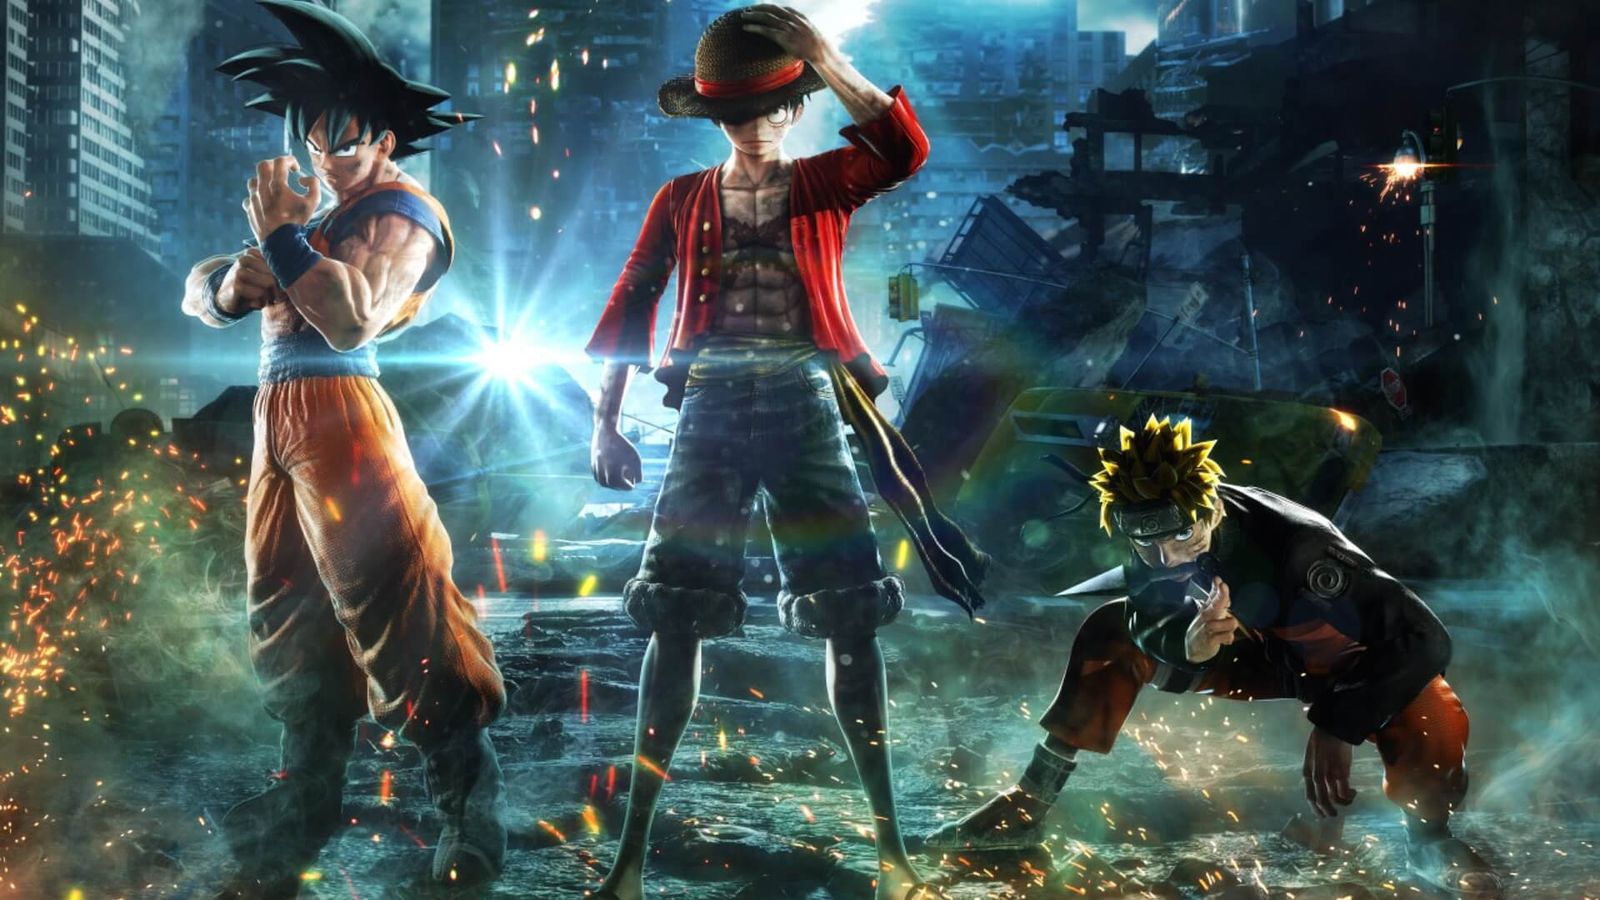 Anime poster featuring One Piece, Naruto and Goku